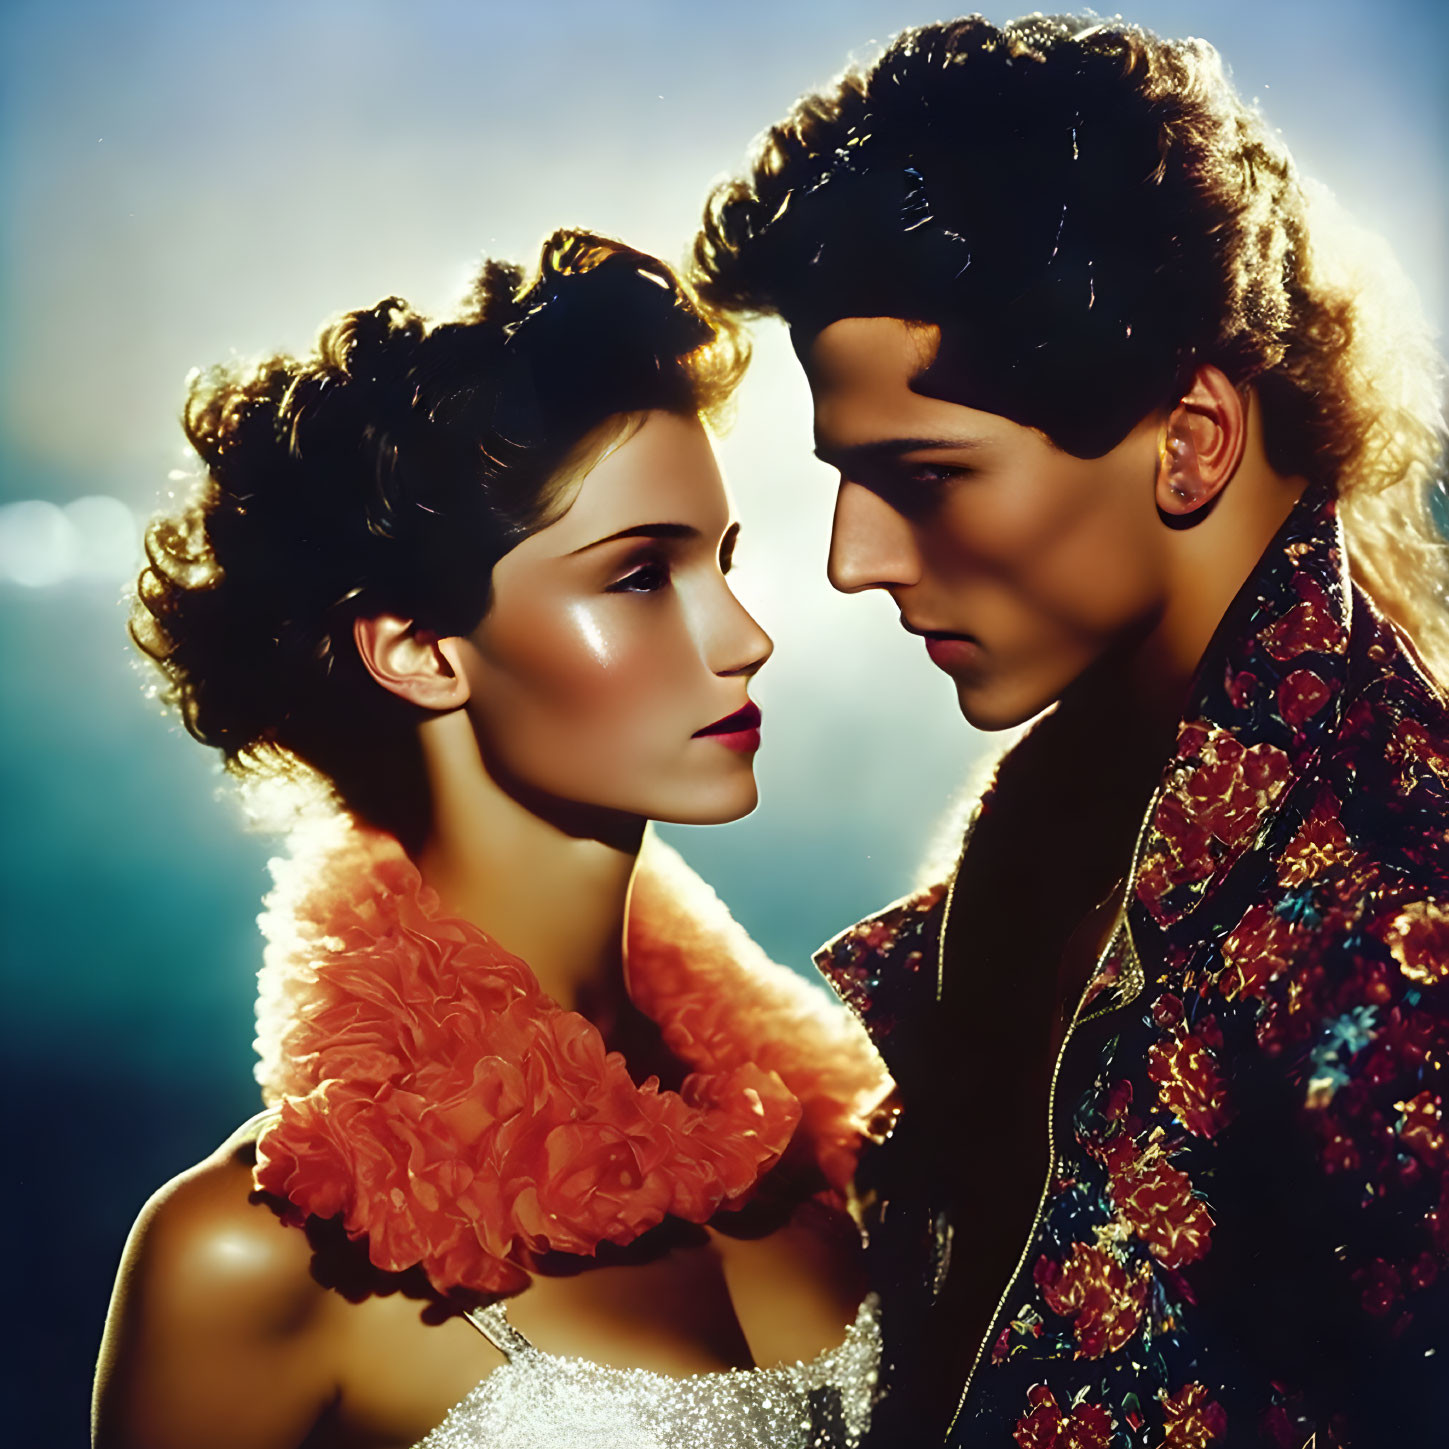 Man and woman in glamorous attire with stylish hairdos gaze intently under warm light